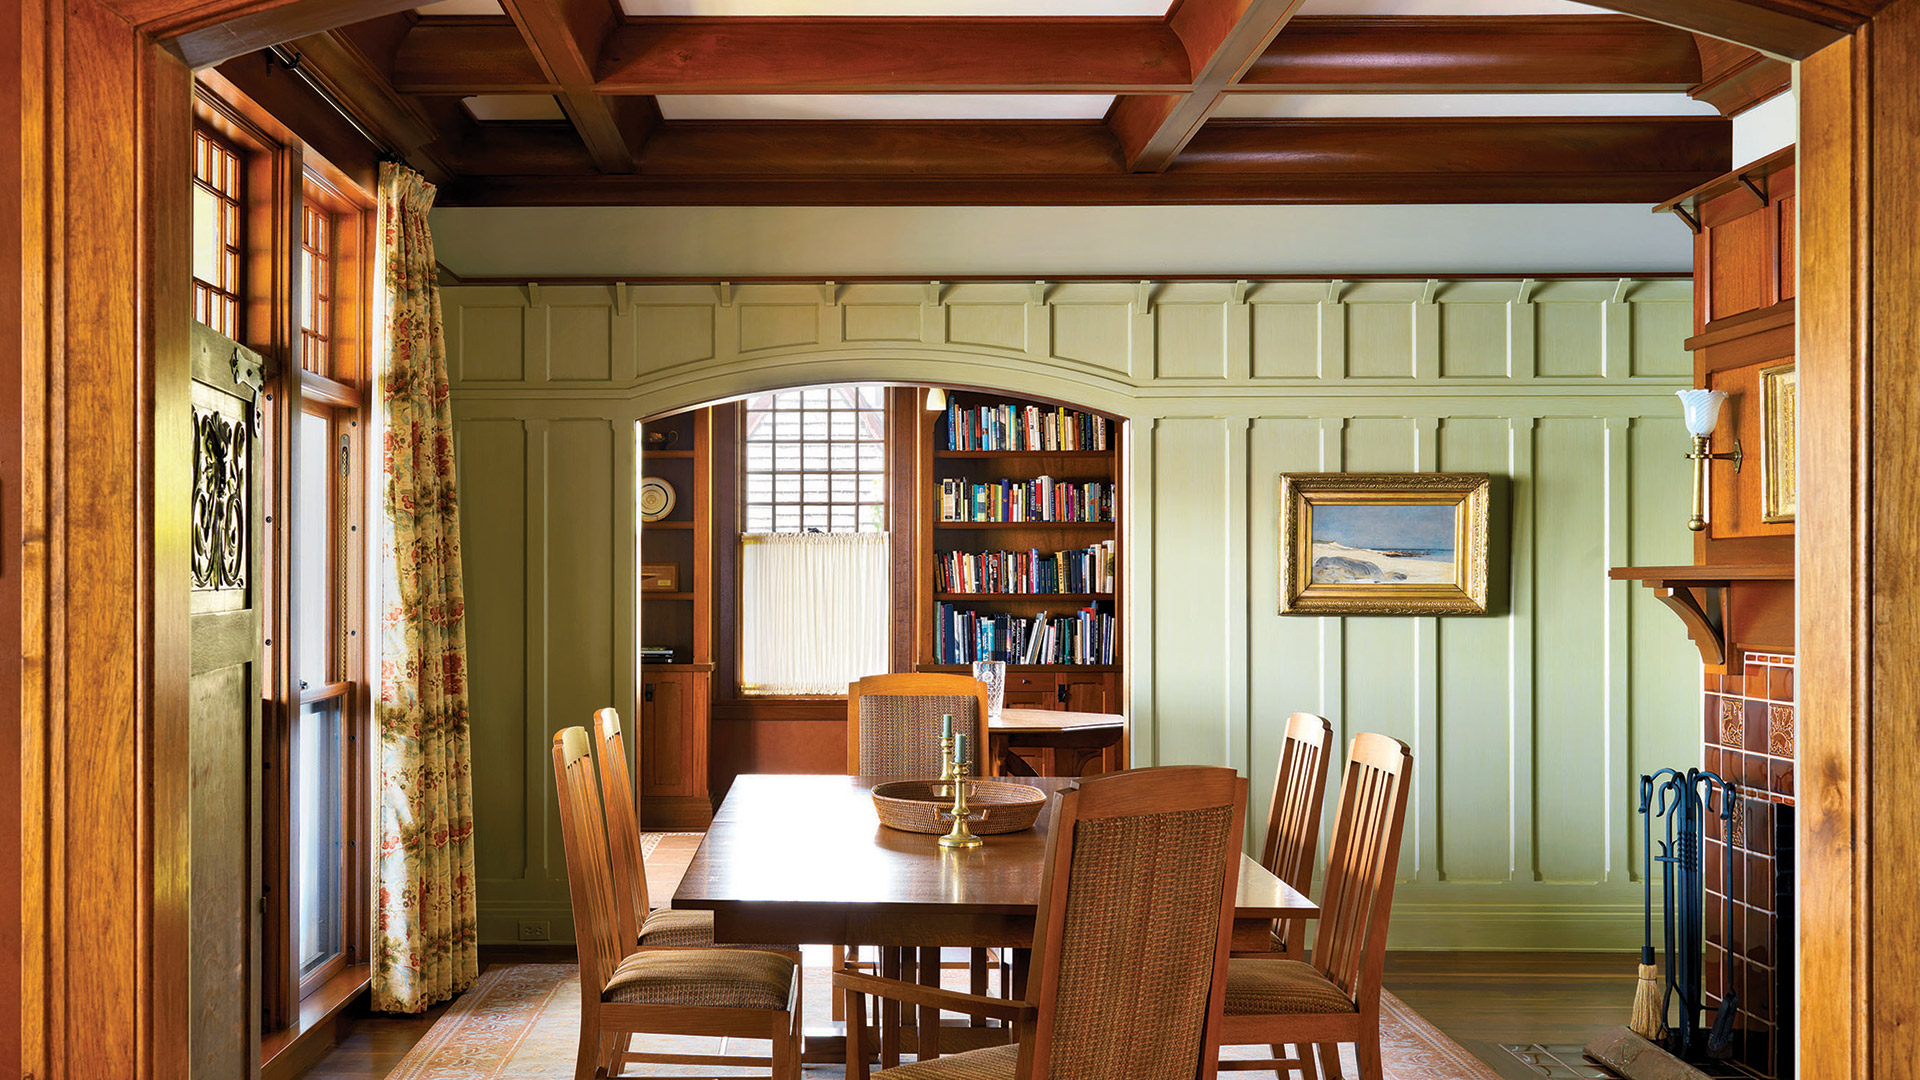 Newport Rhode Island view of dining room table and paneled wall